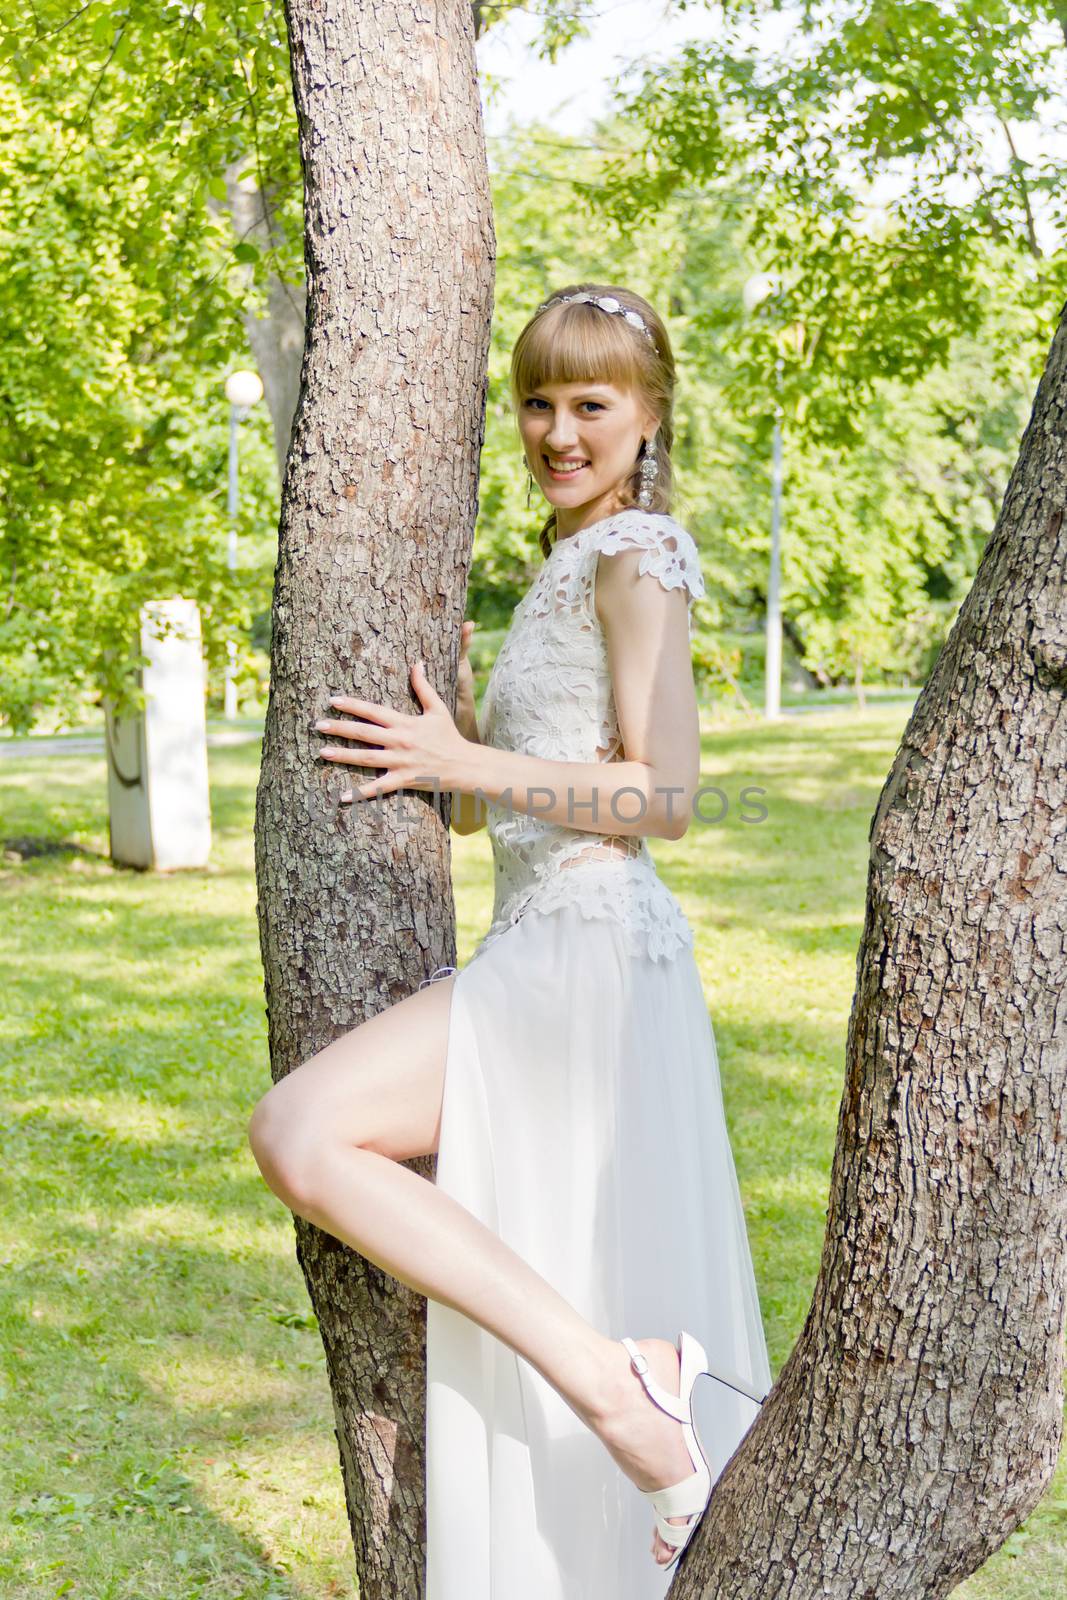 Bride with bare leg bent at the knee by Julialine